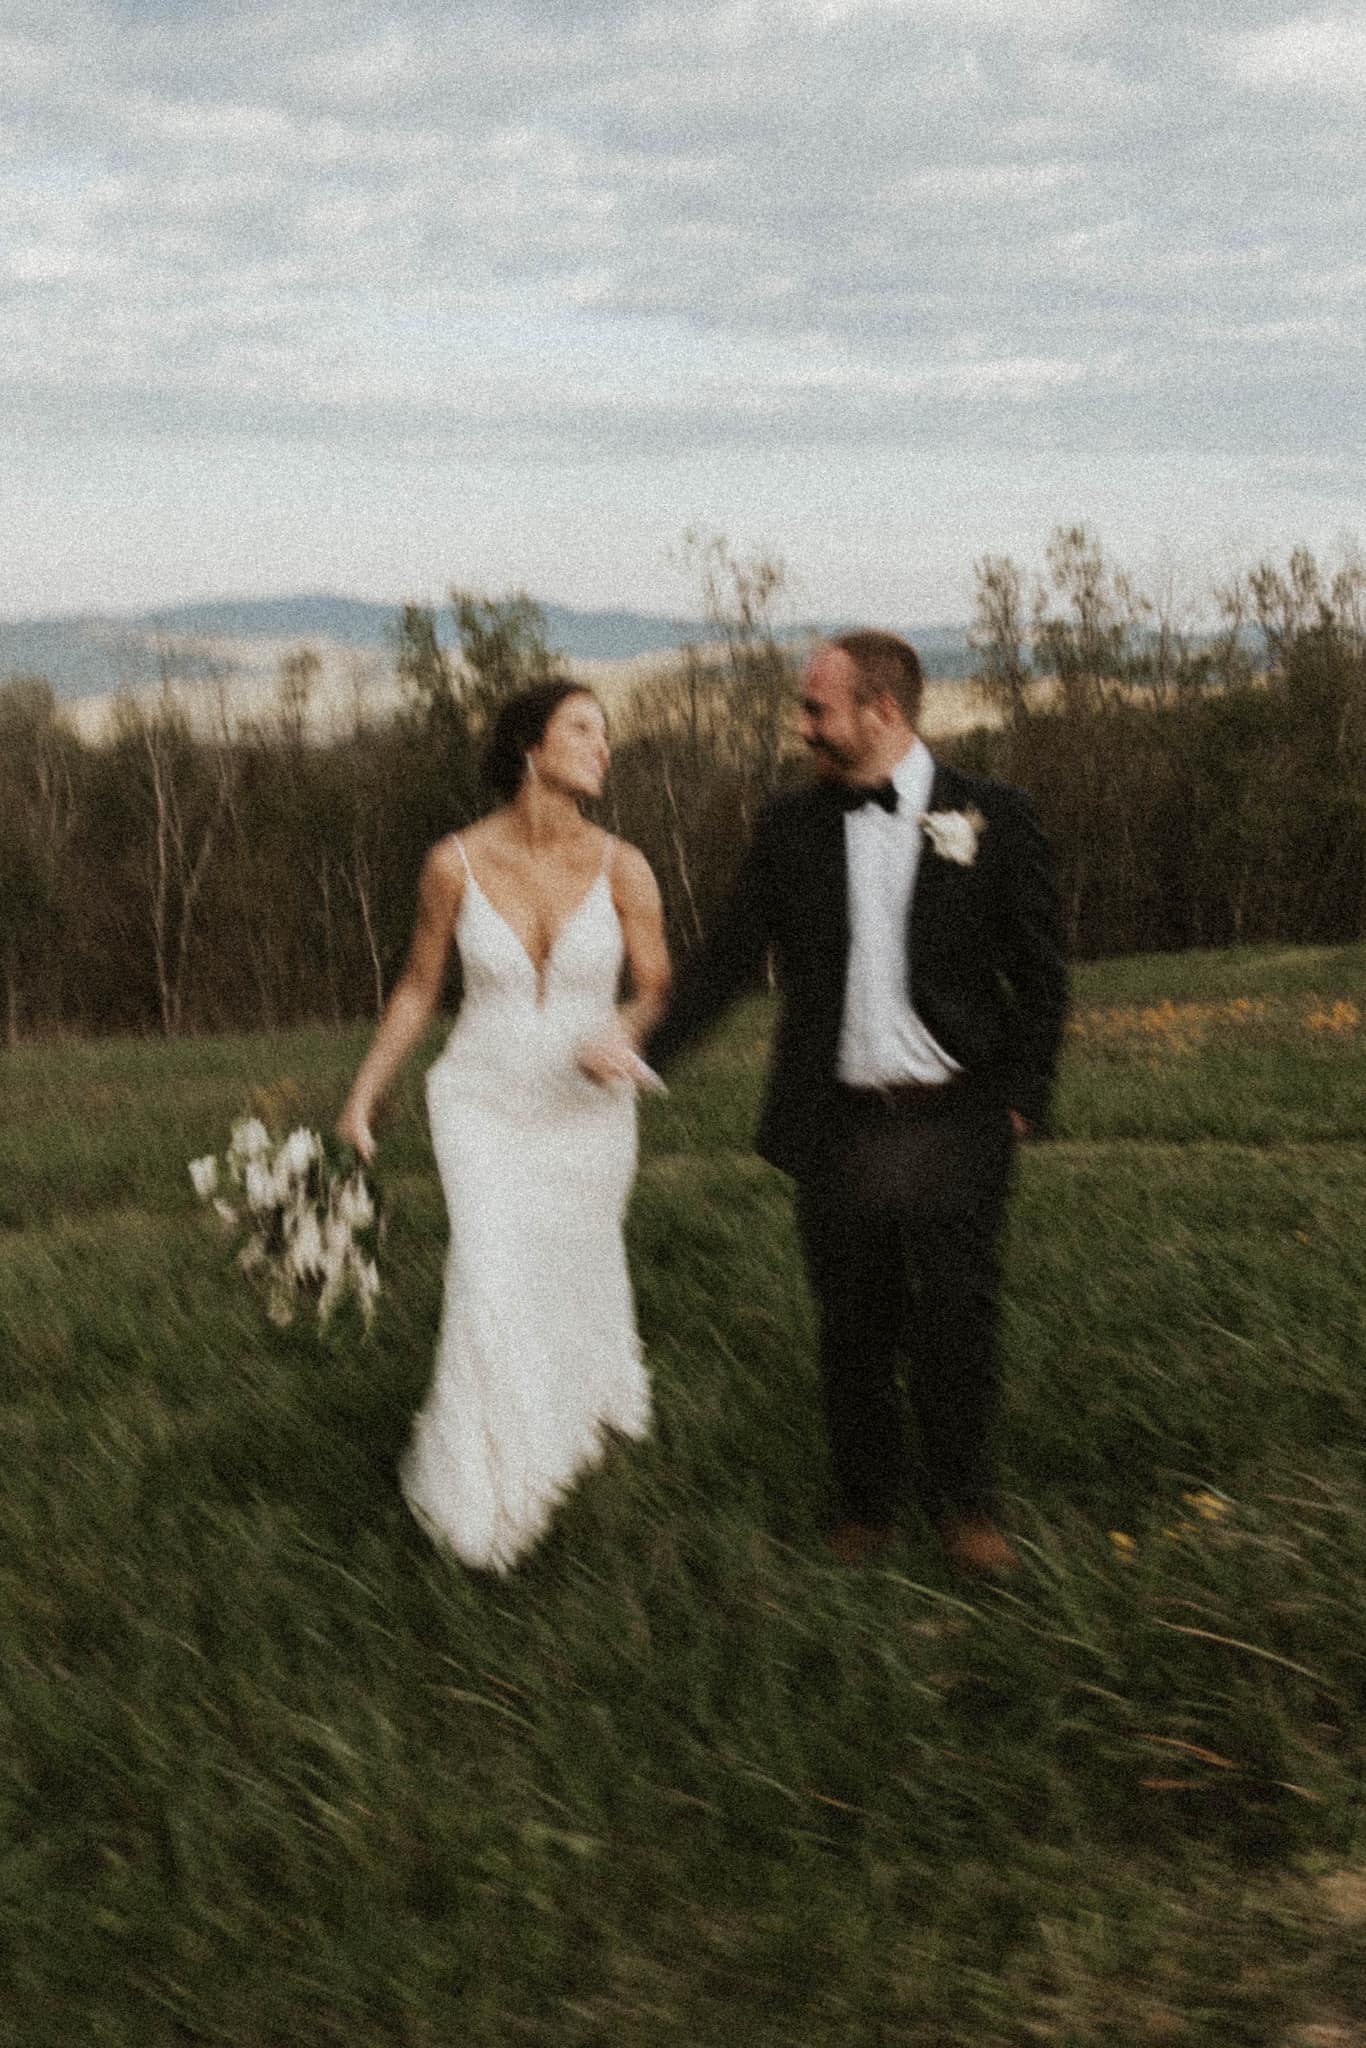 a blurry image of a wedding couple running through the fields